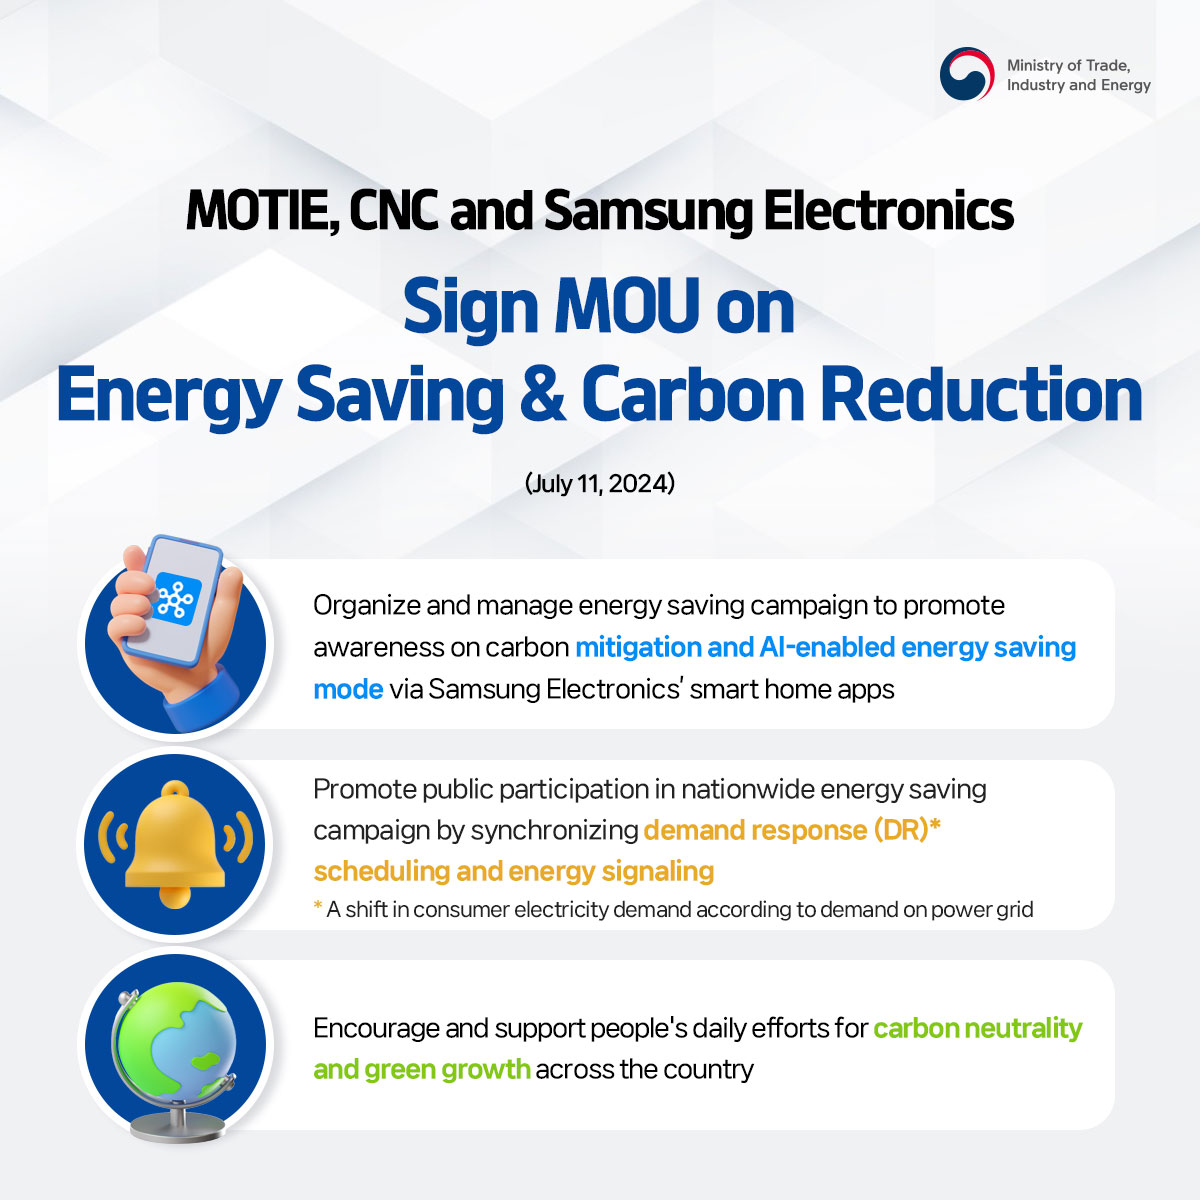 MOTIE, CNC and Samsung Electronics sign MOU on energy reduction & carbon reduction